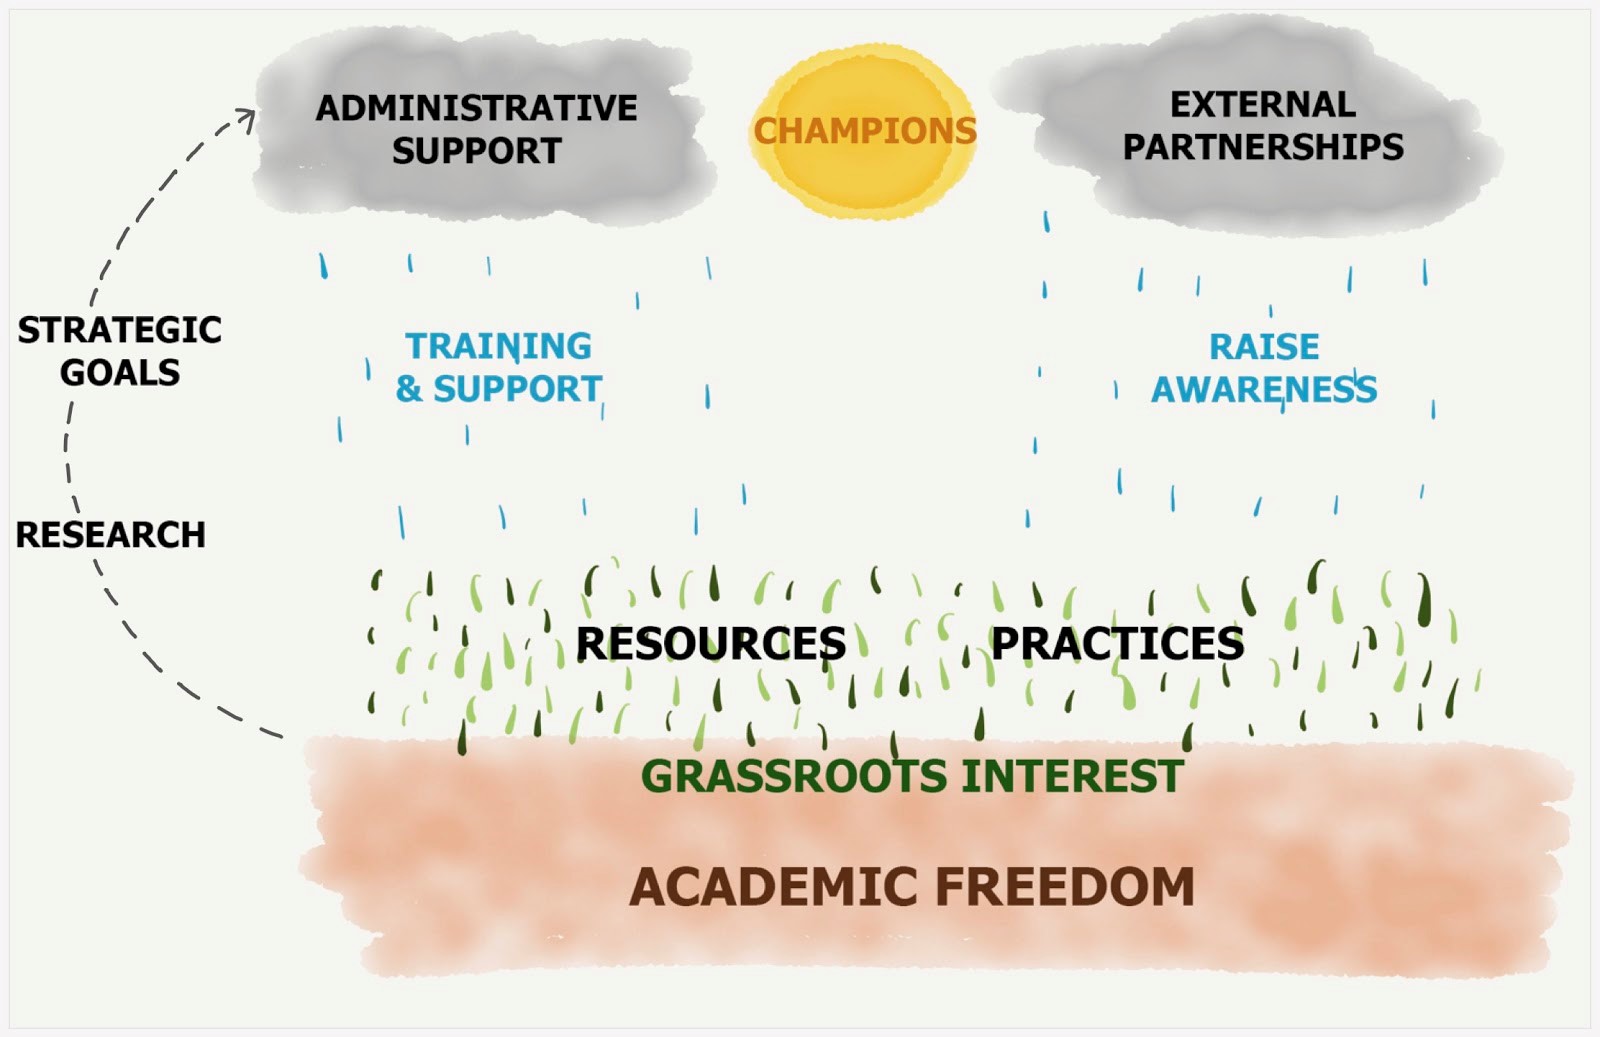 Flow chart from academic freedom to administrative support and raising awareness. Chart uses symbols of clouds, rain, sunshine, and grass.